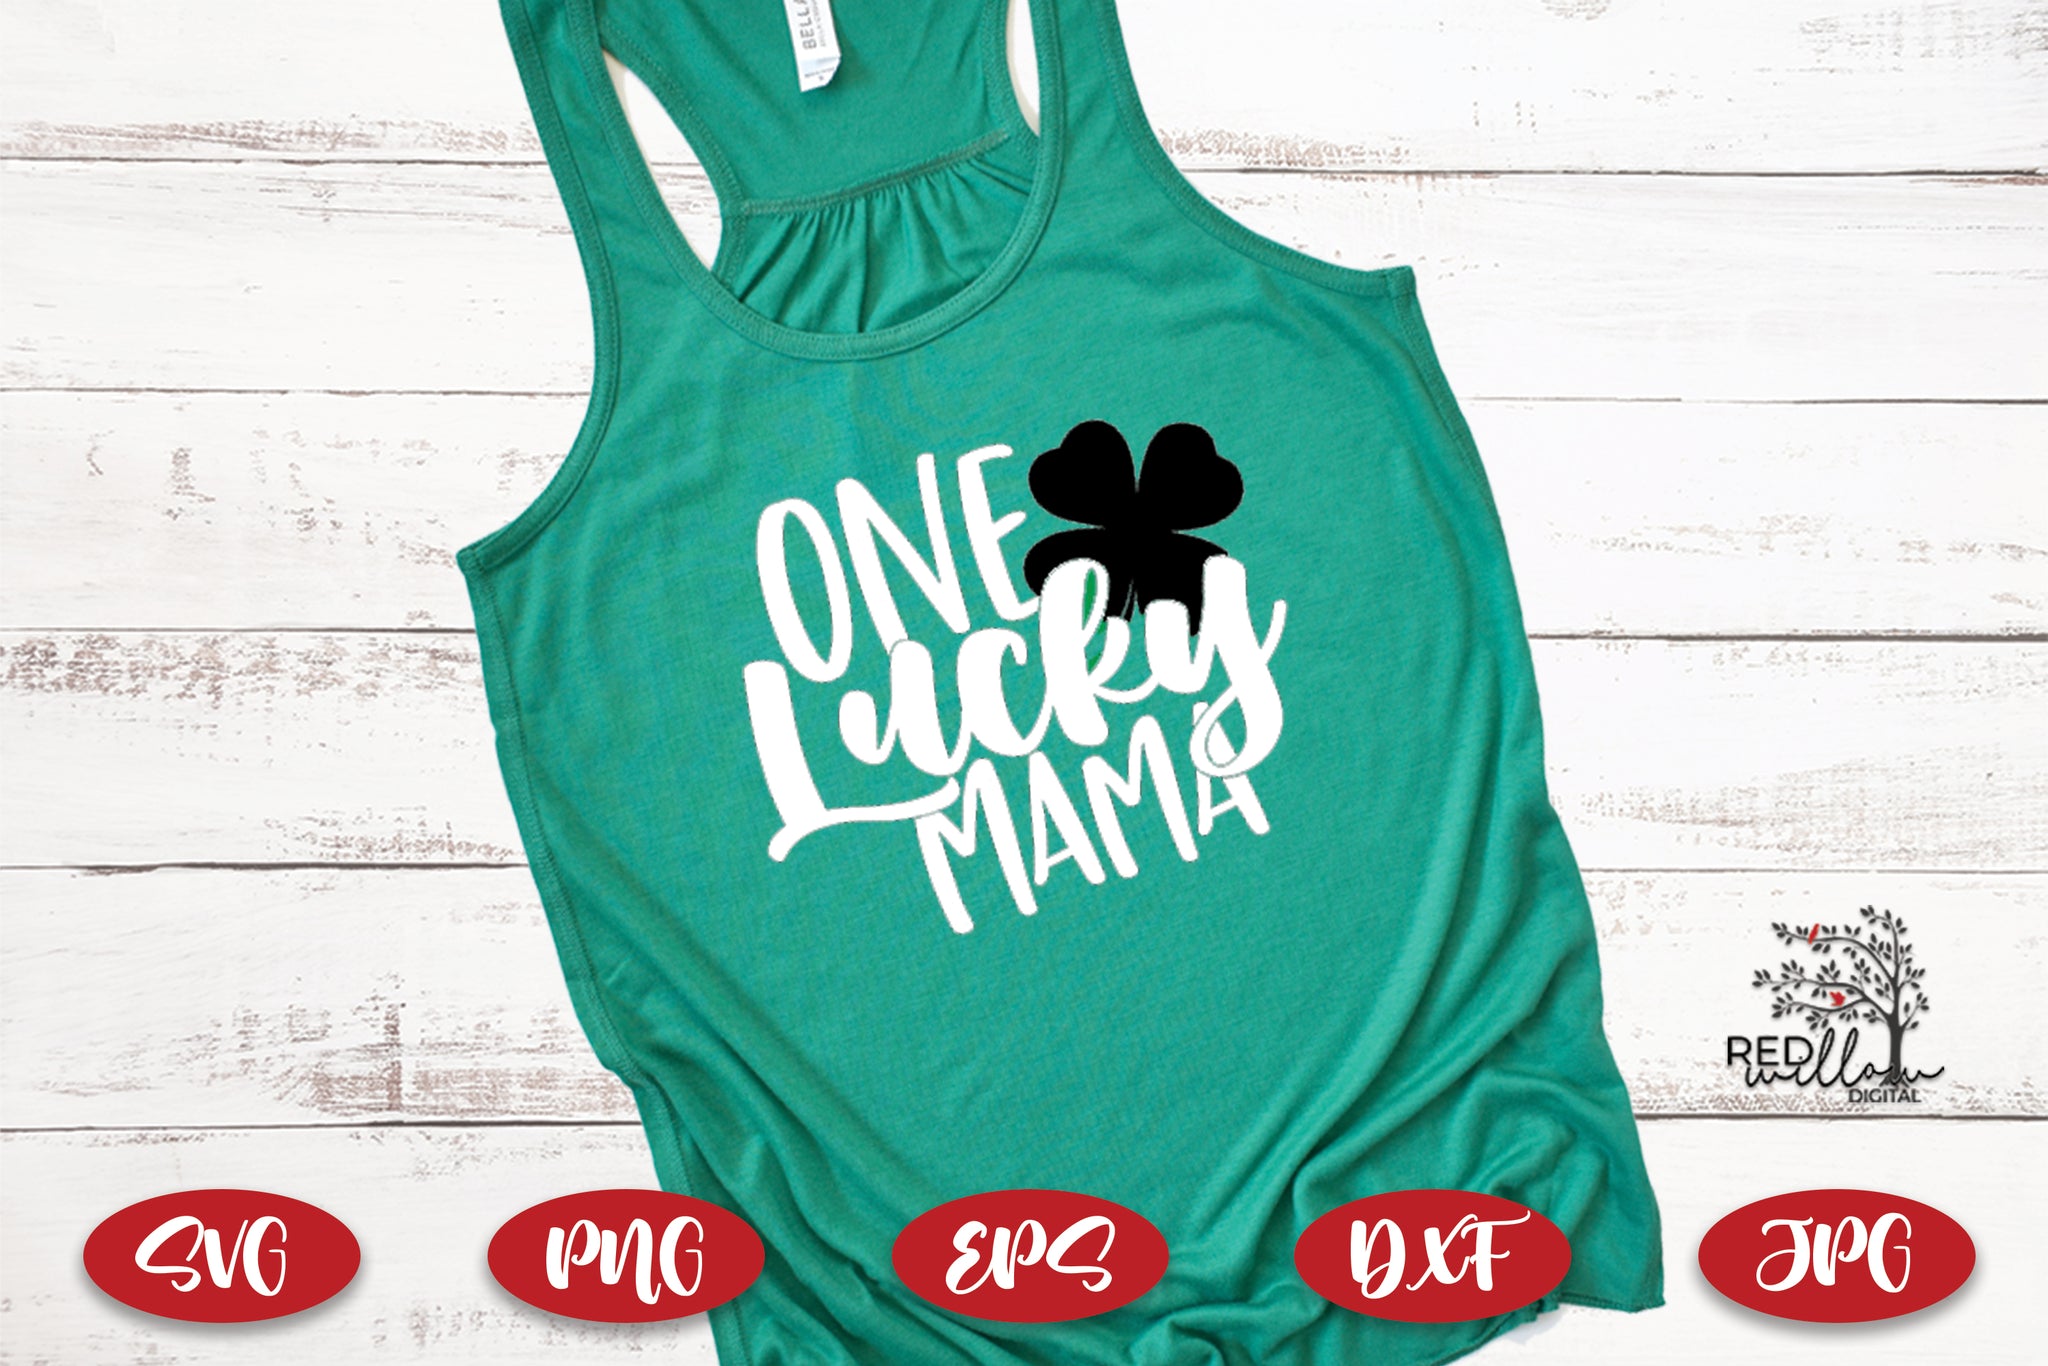 One Lucky Mama St. Patrick's Day SVG File